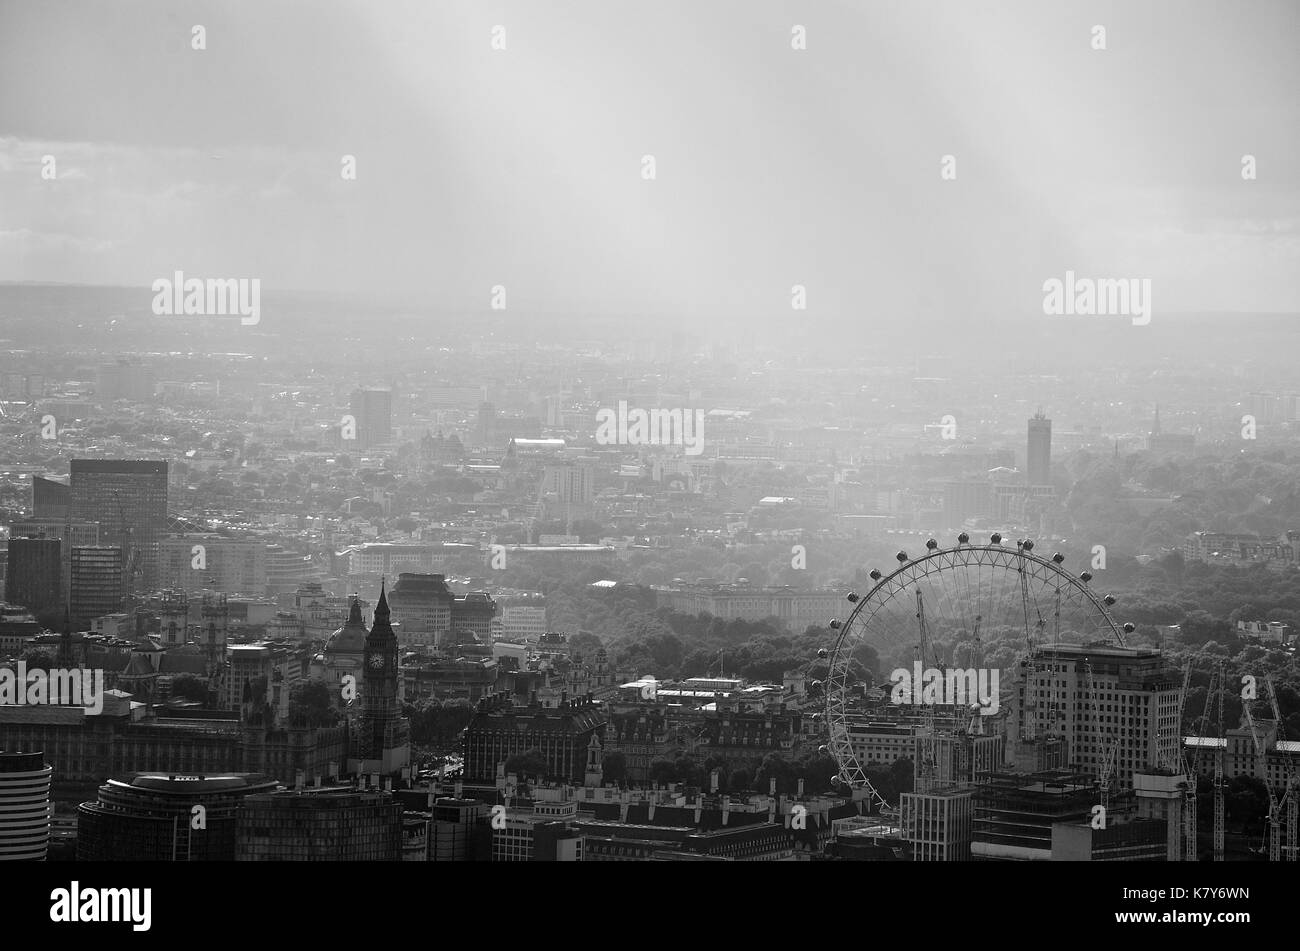 London from above - view over London from The Shard in september 2017 on a moody day. Stock Photo